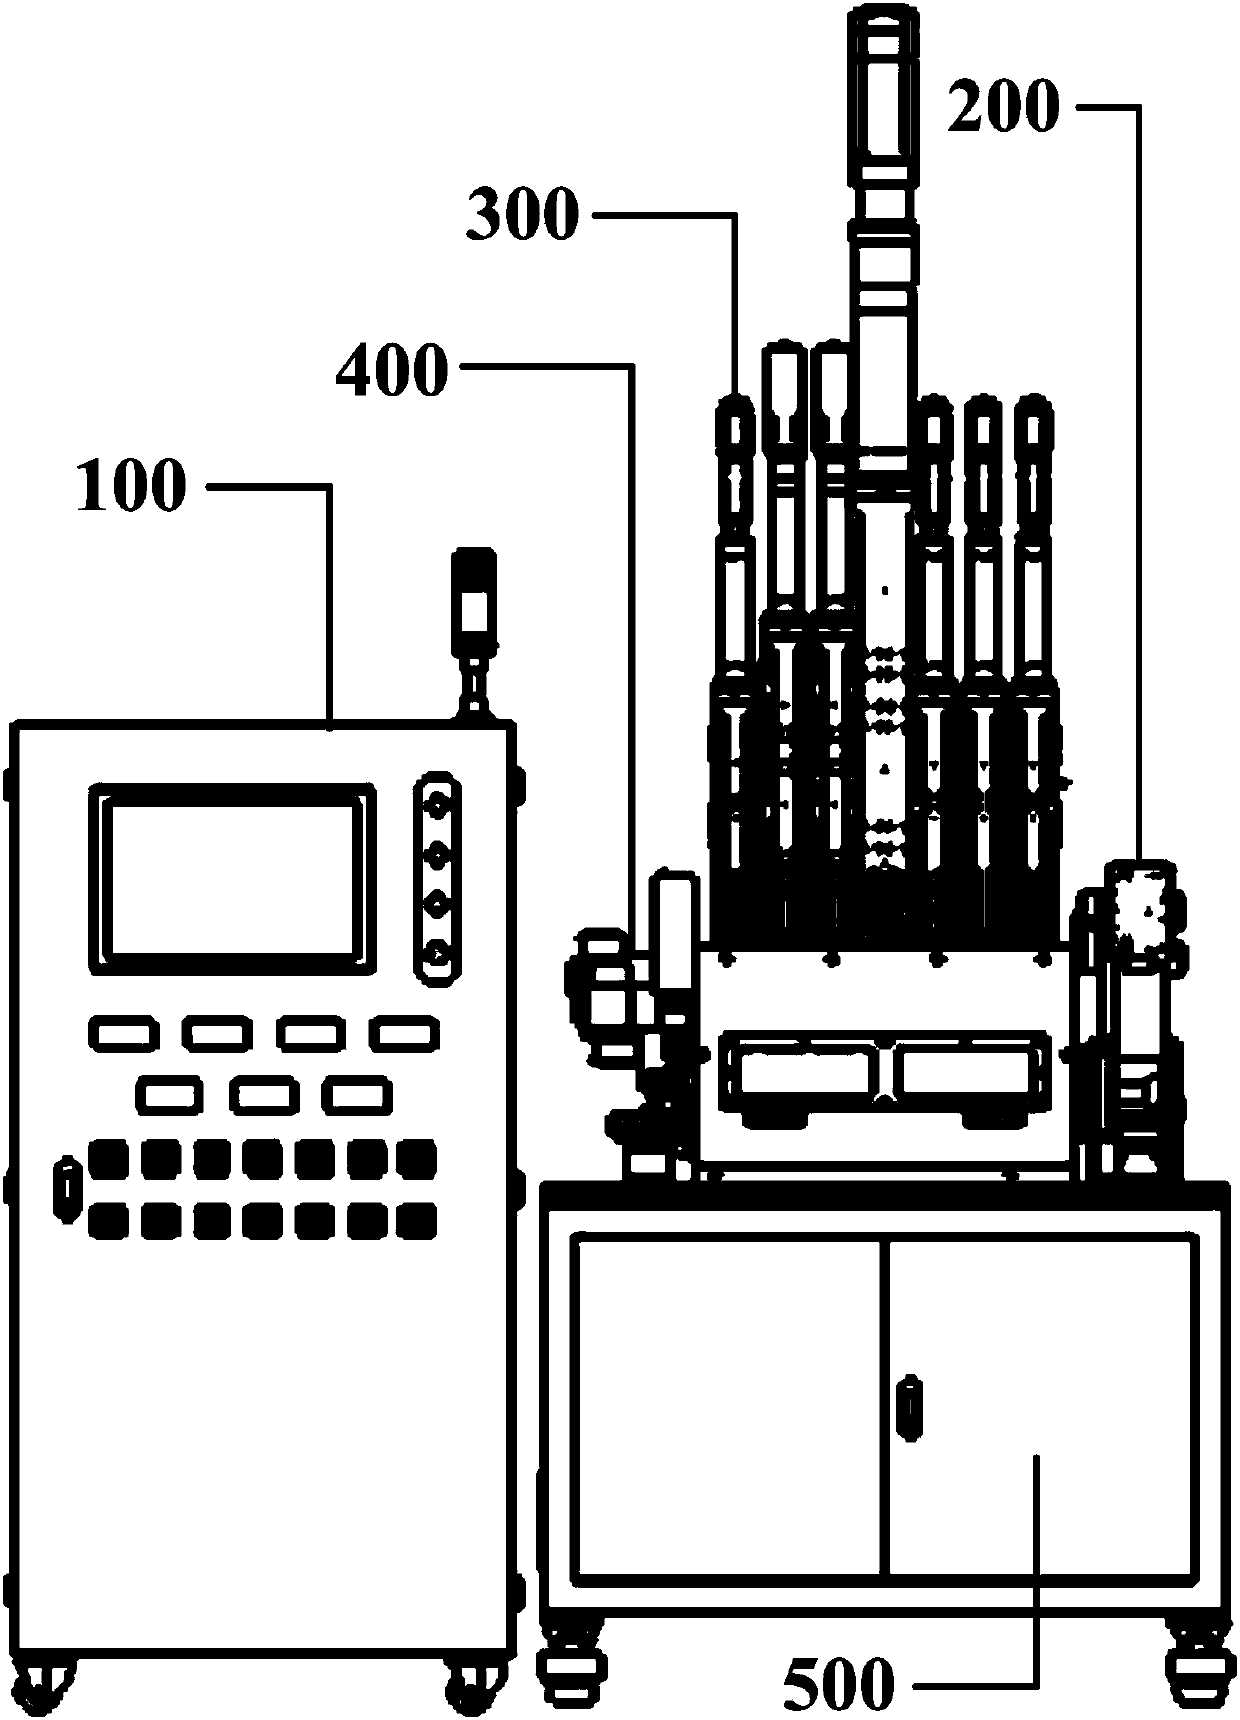 All motor-driven precision compression molding machine and operation method